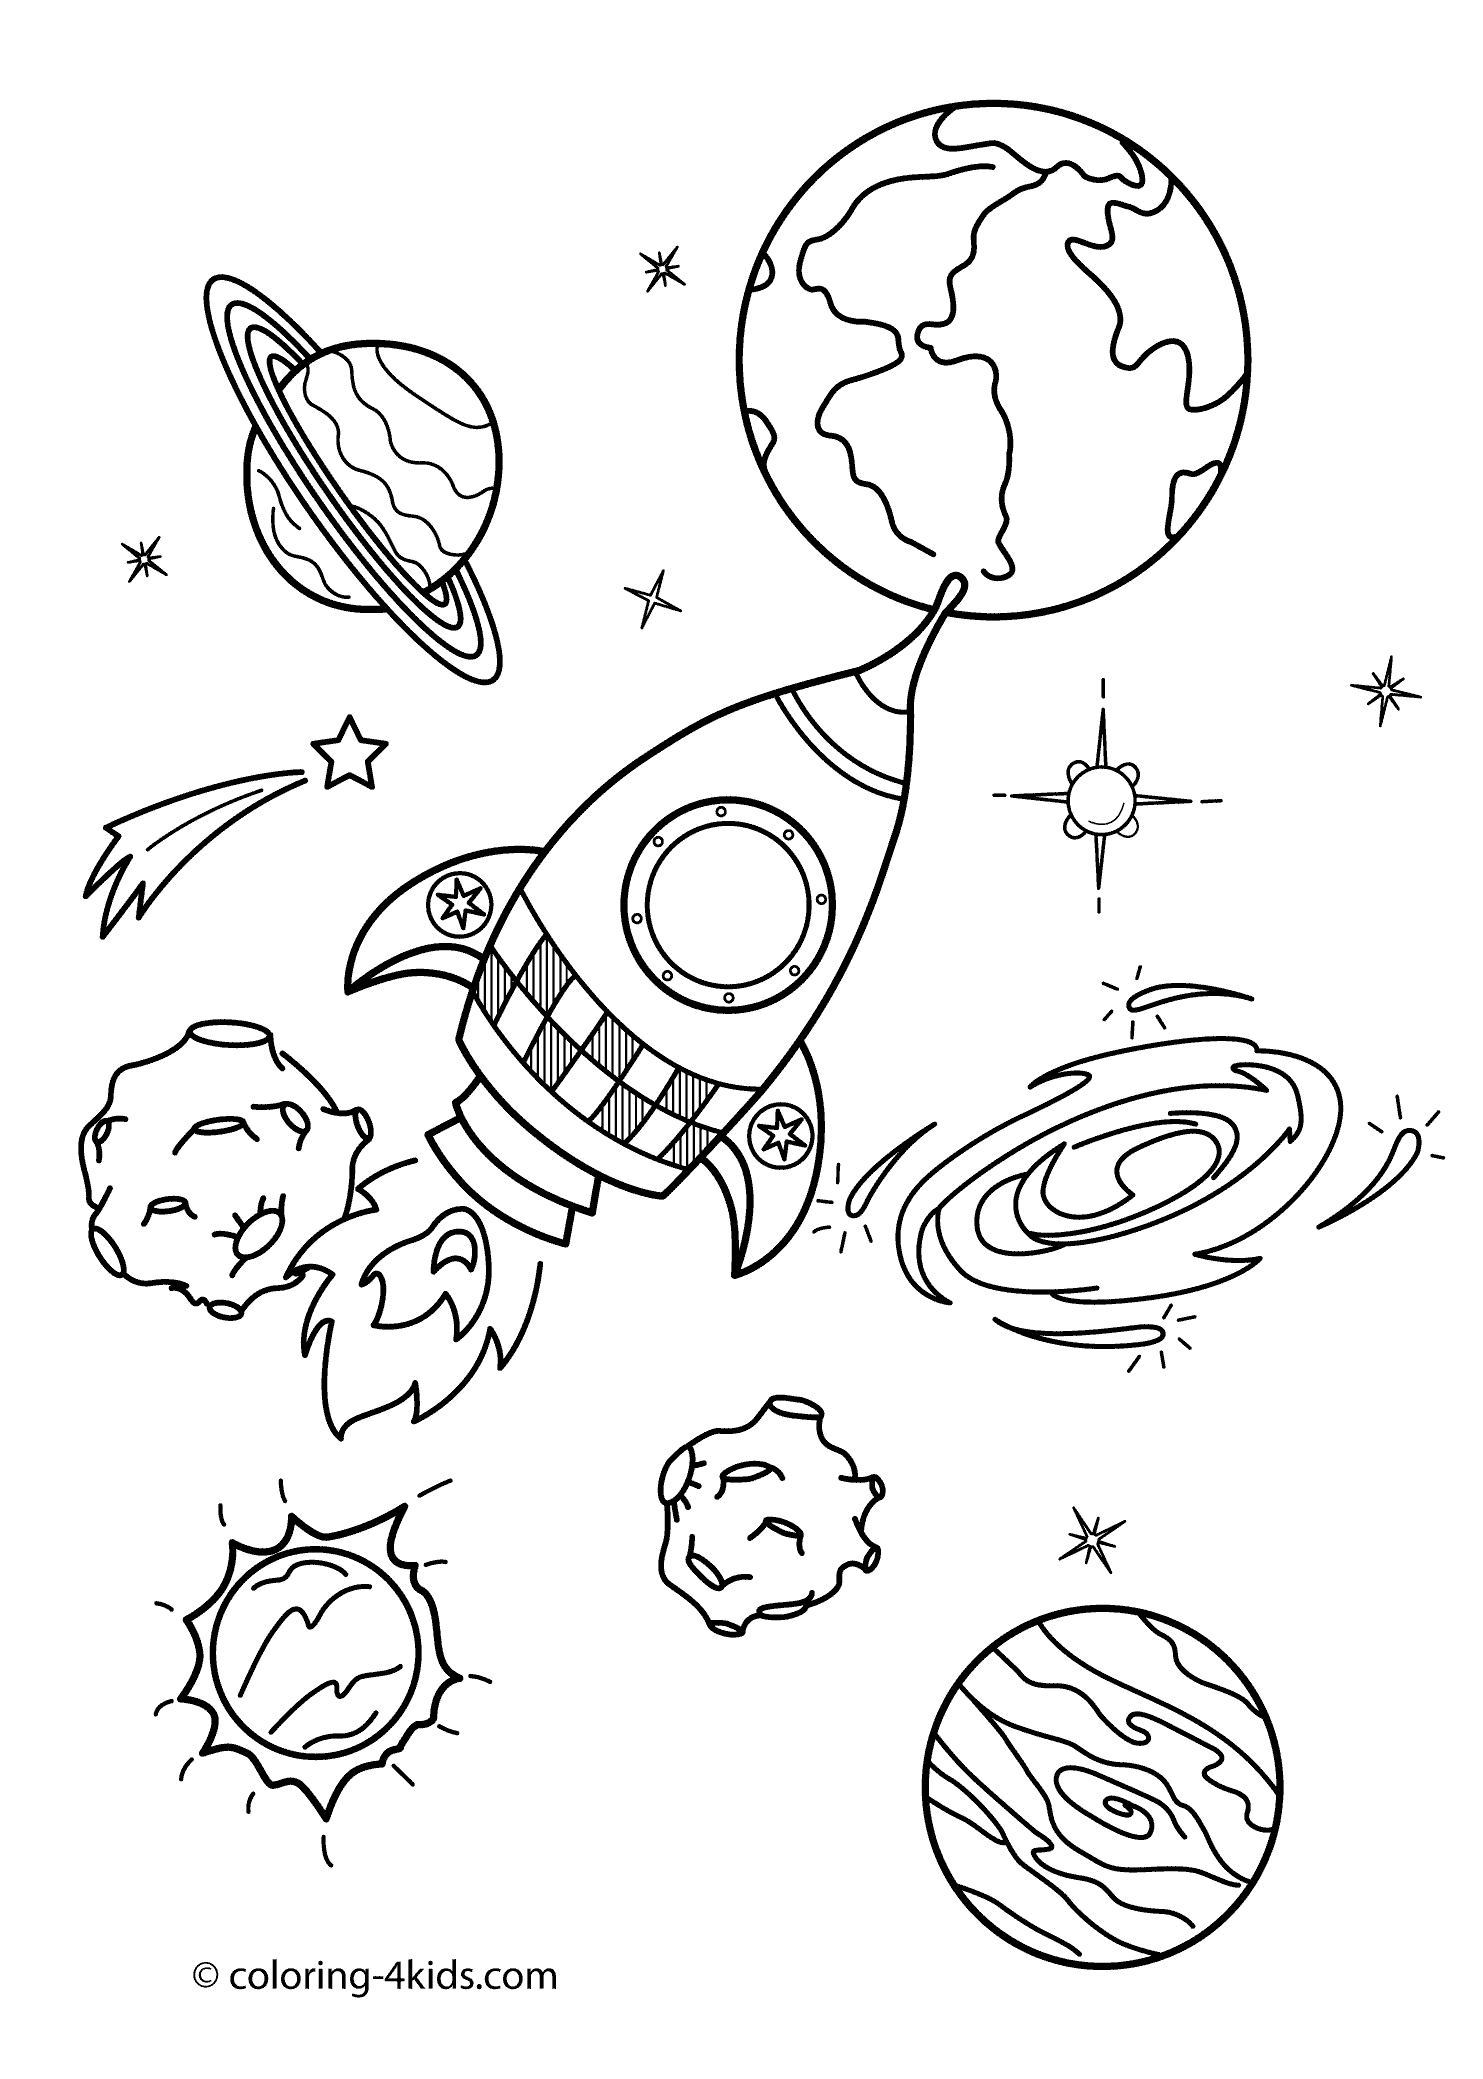 space coloring sheet trippy space rocket and planets coloring page free coloring sheet space 